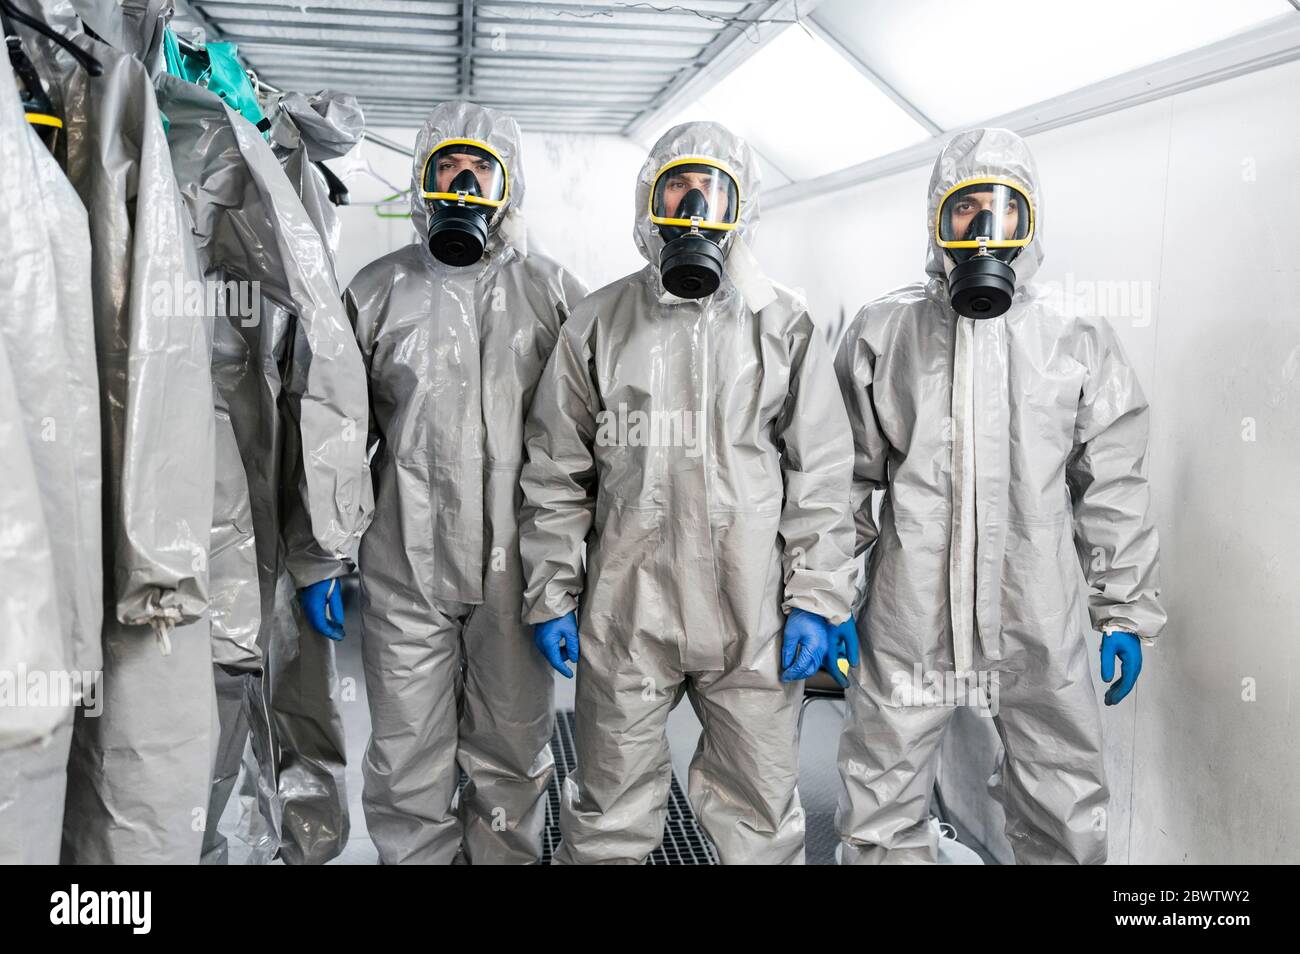 Portrait of sanitation workers standing in protective coverall suits during pandemic Stock Photo